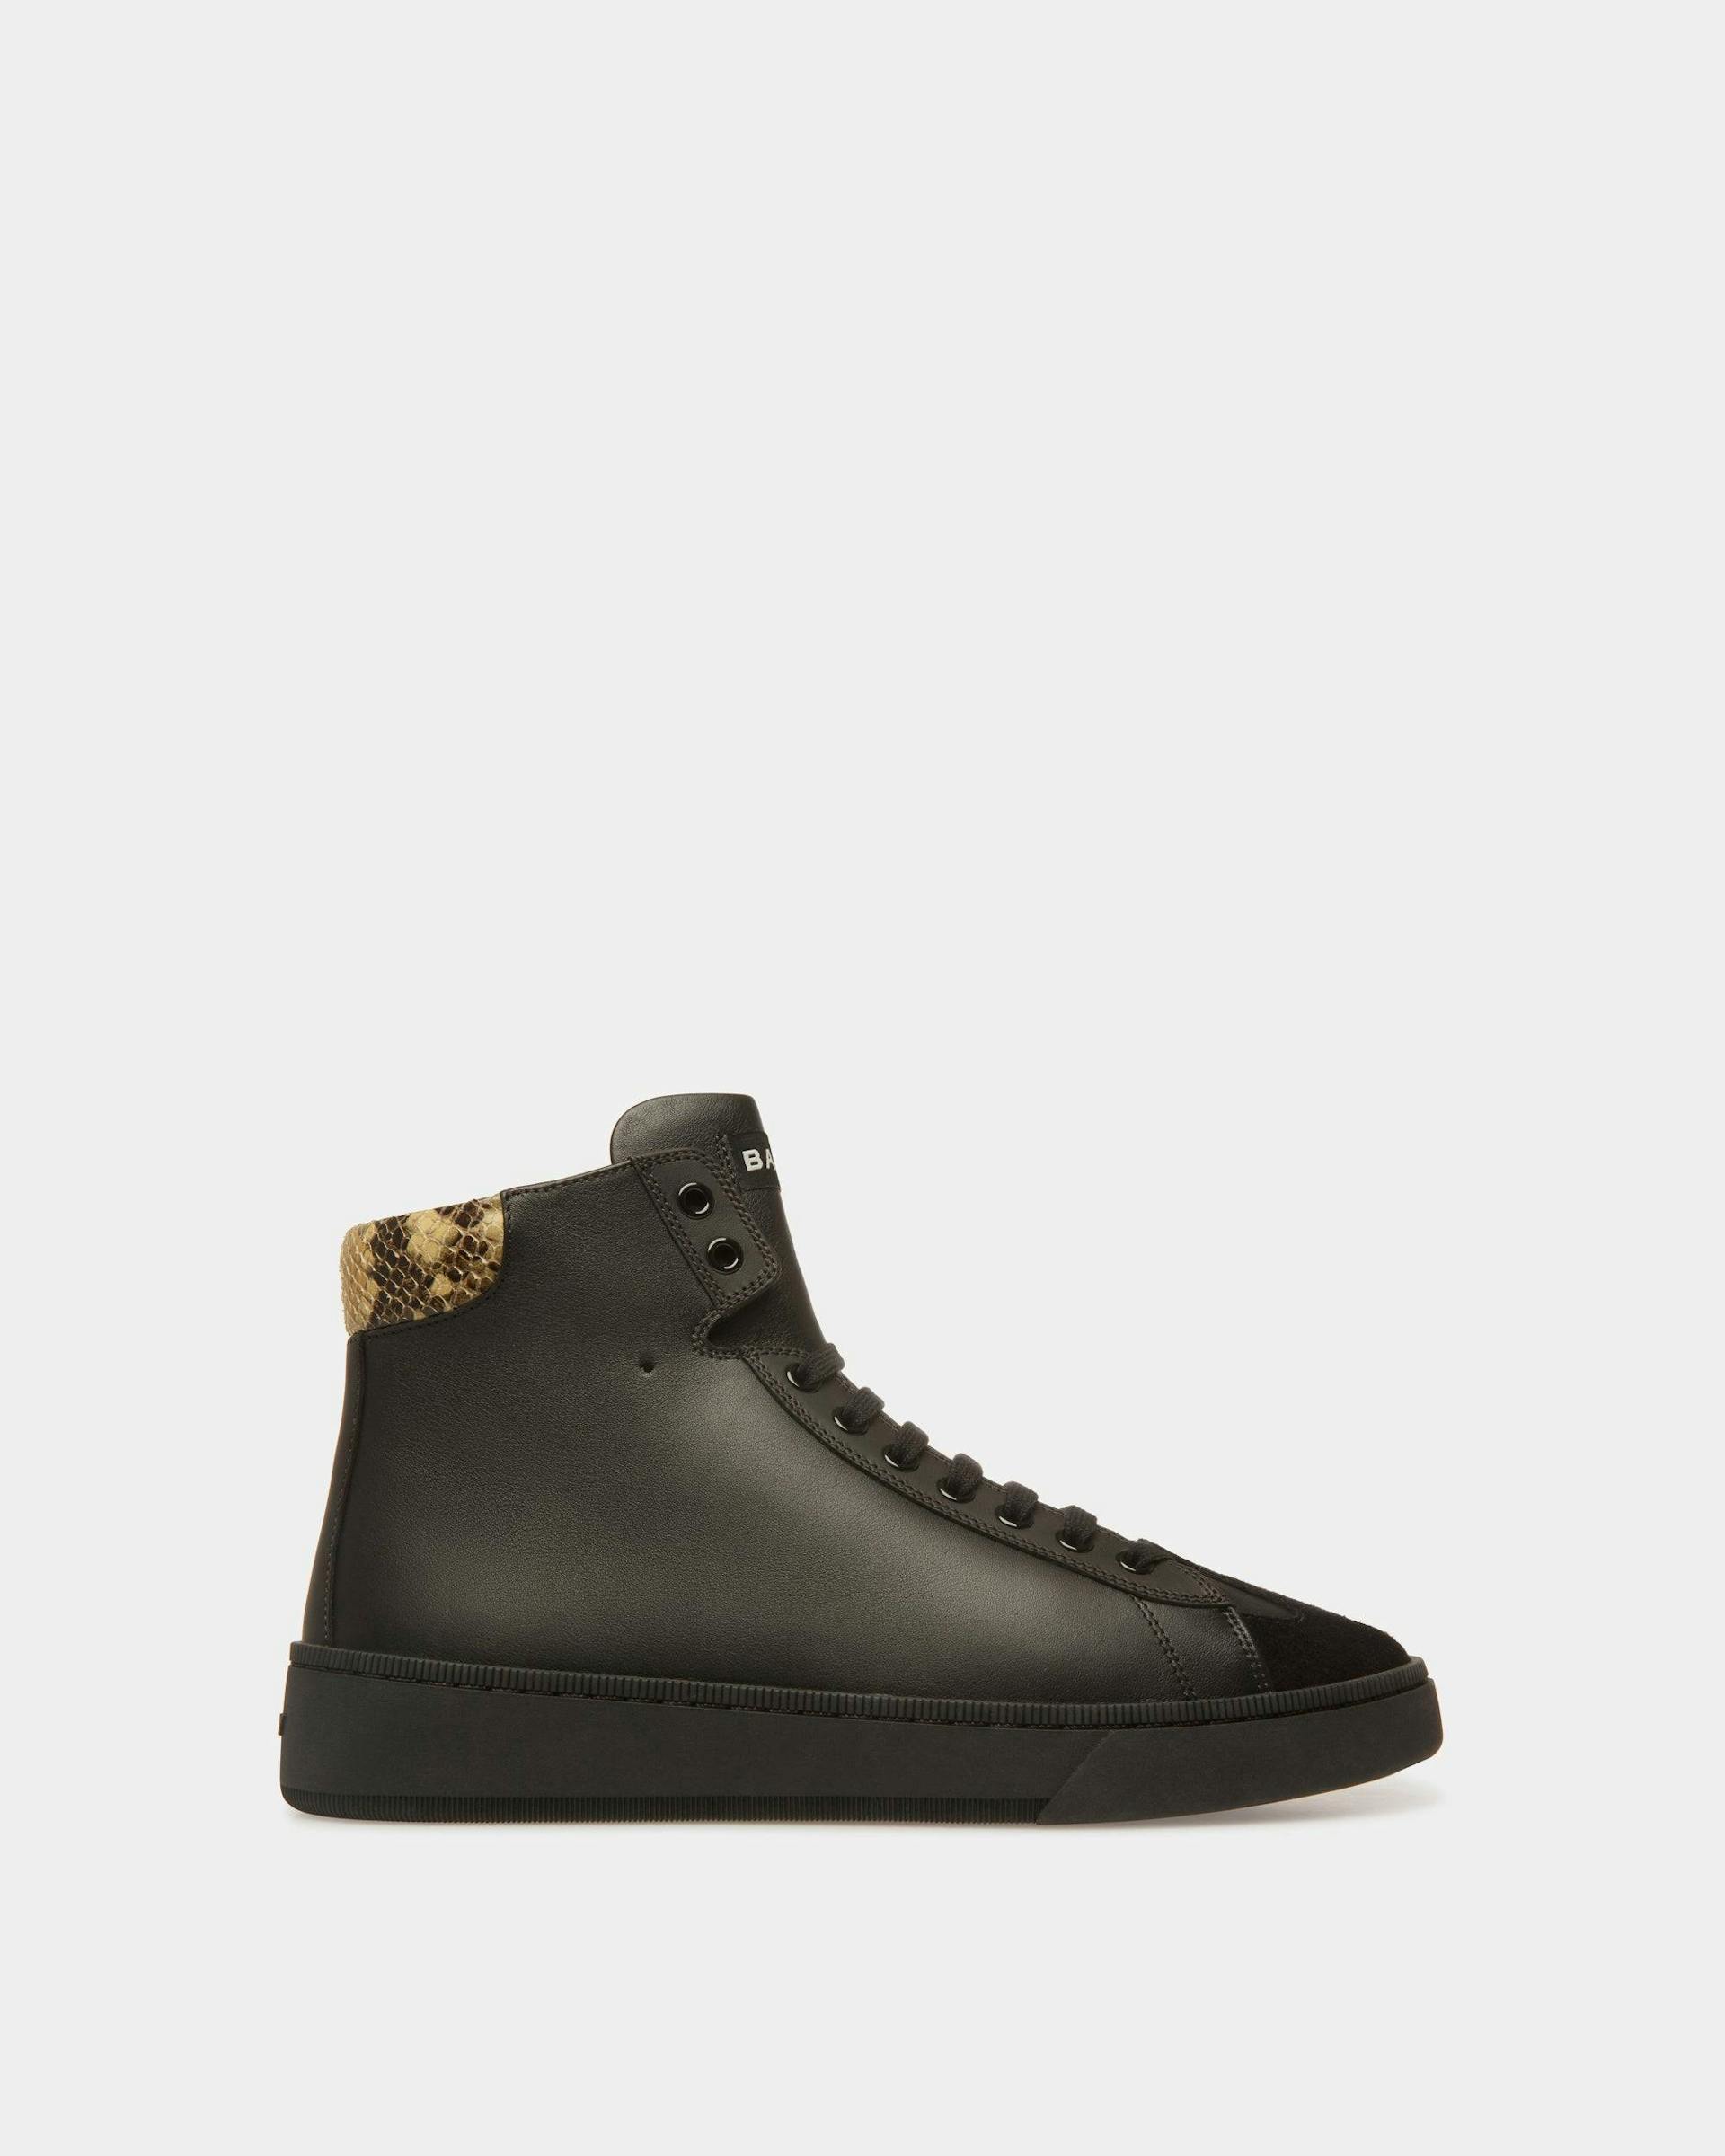 Raise Sneakers In Black And Python Print Leather - Men's - Bally - 01